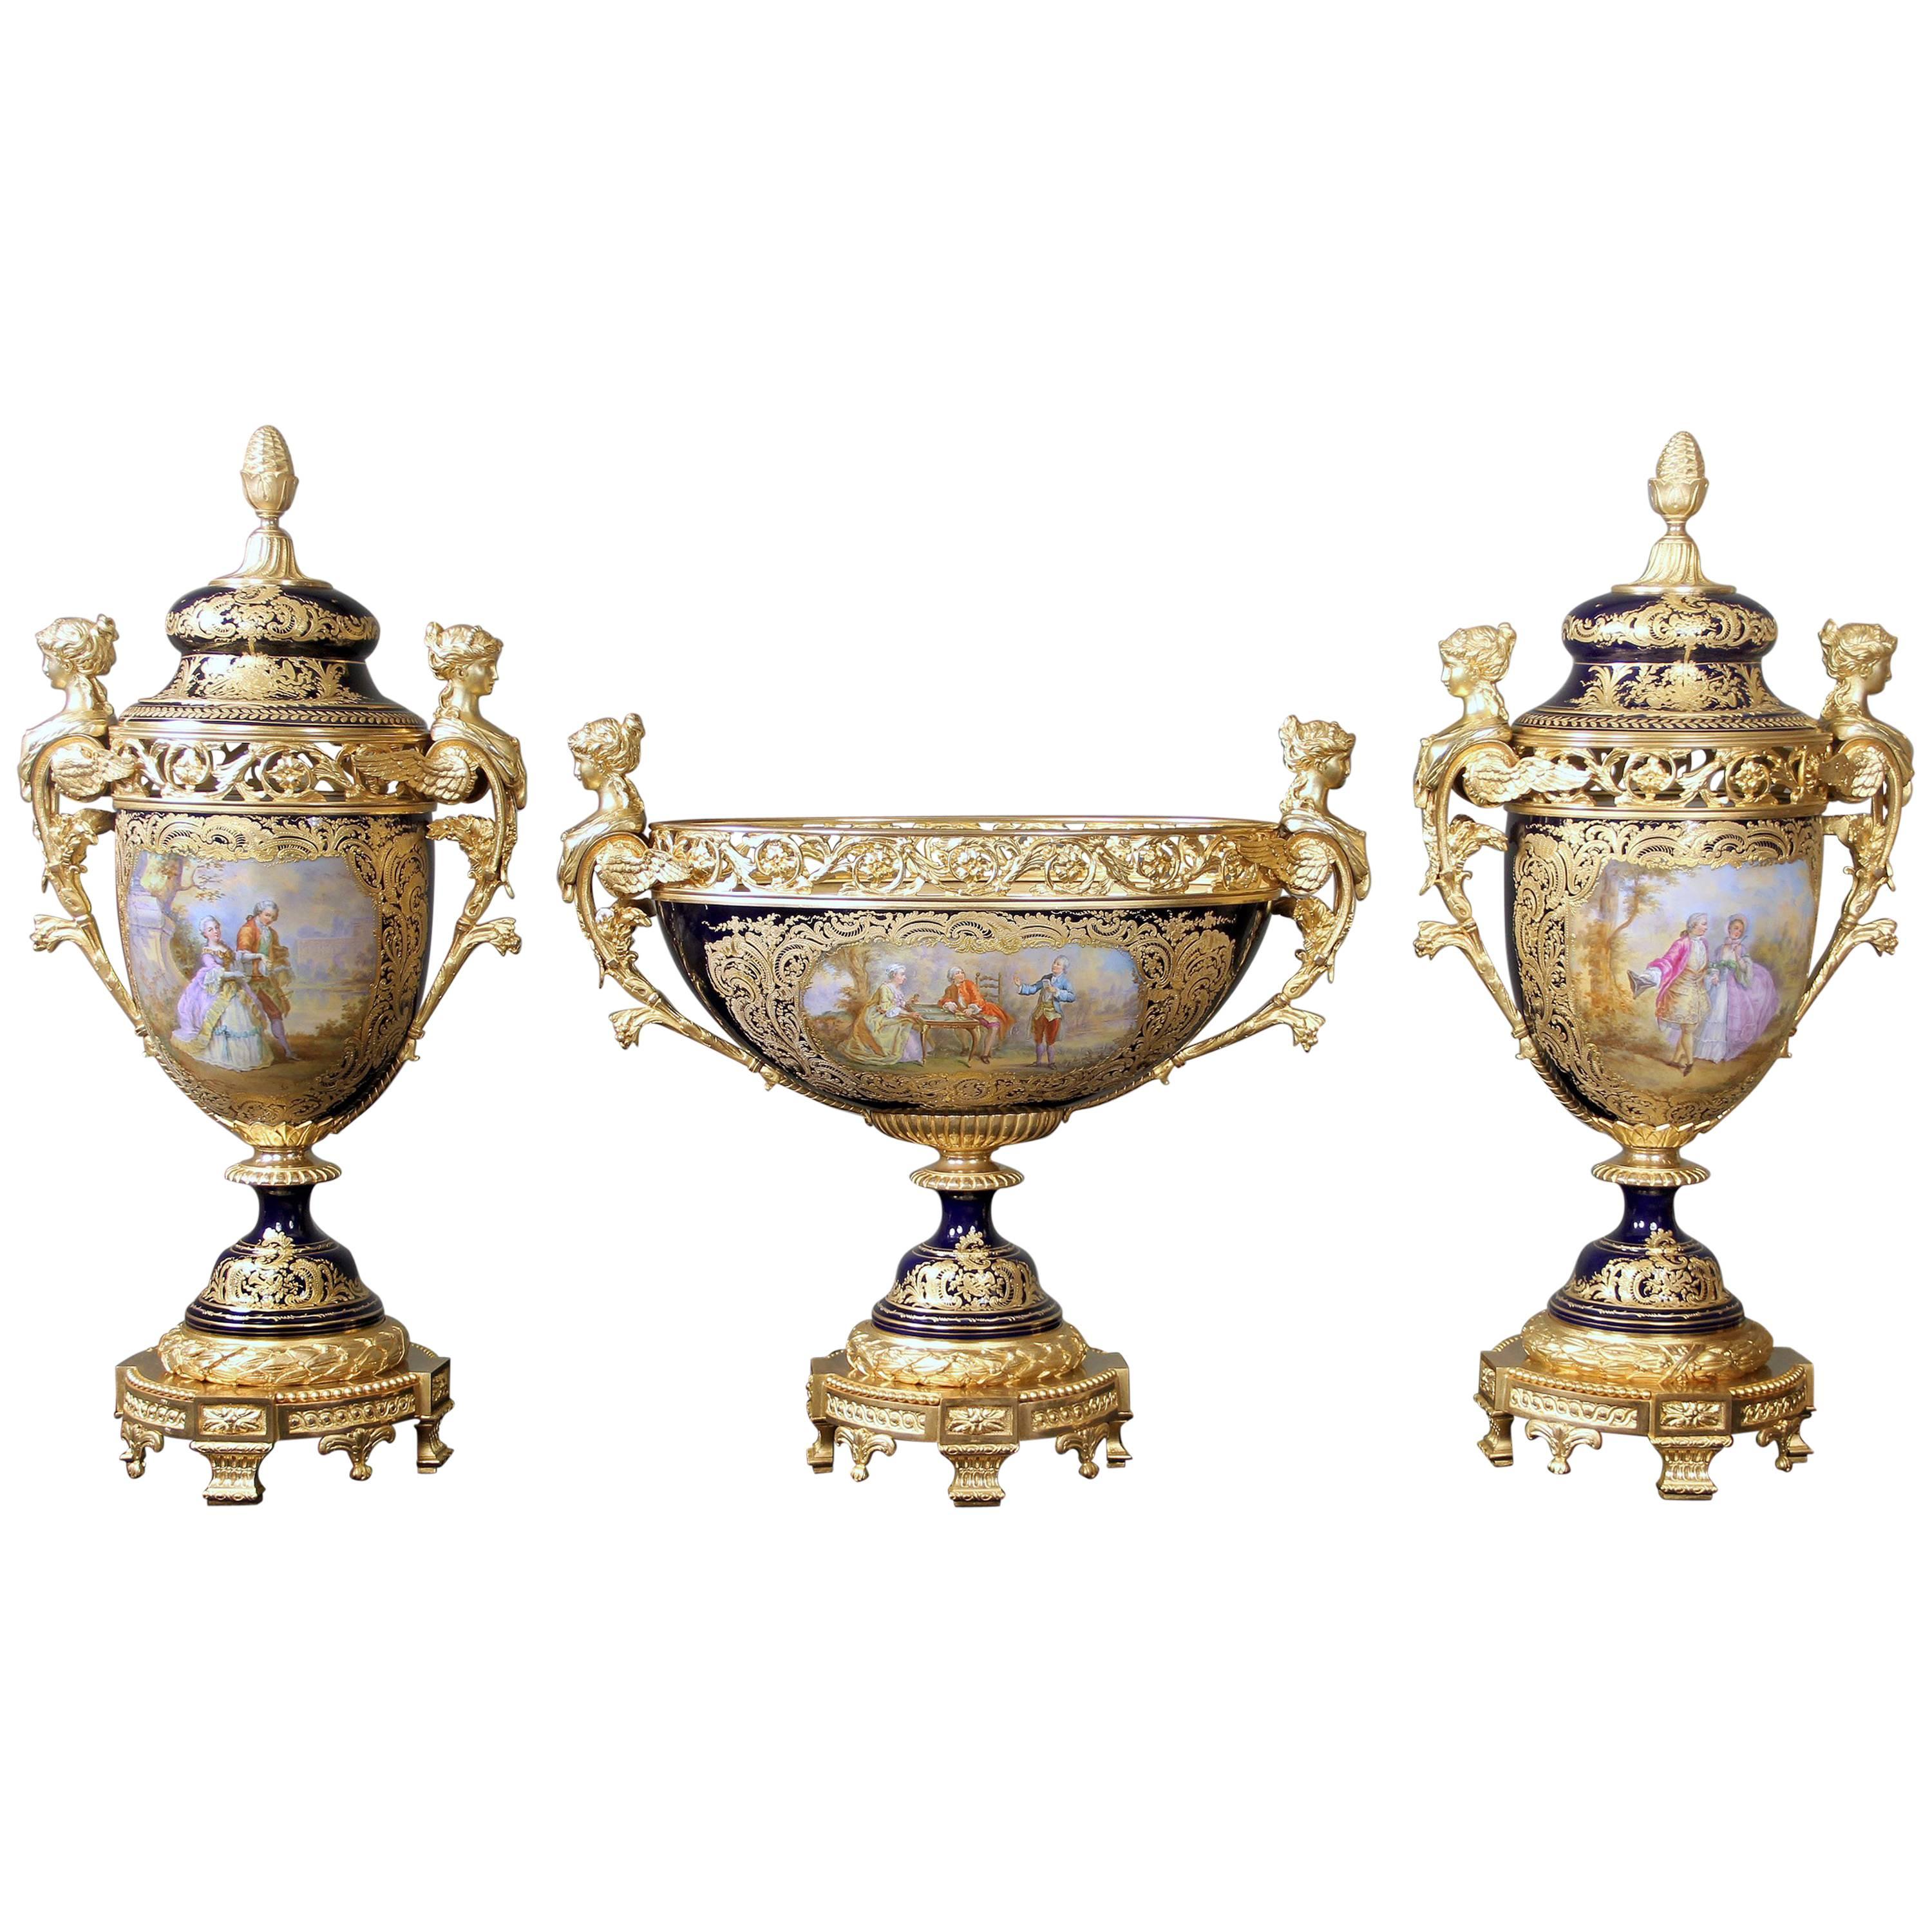 Late 19th Century Gilt Bronze Mounted Sèvres Style Porcelain Garniture